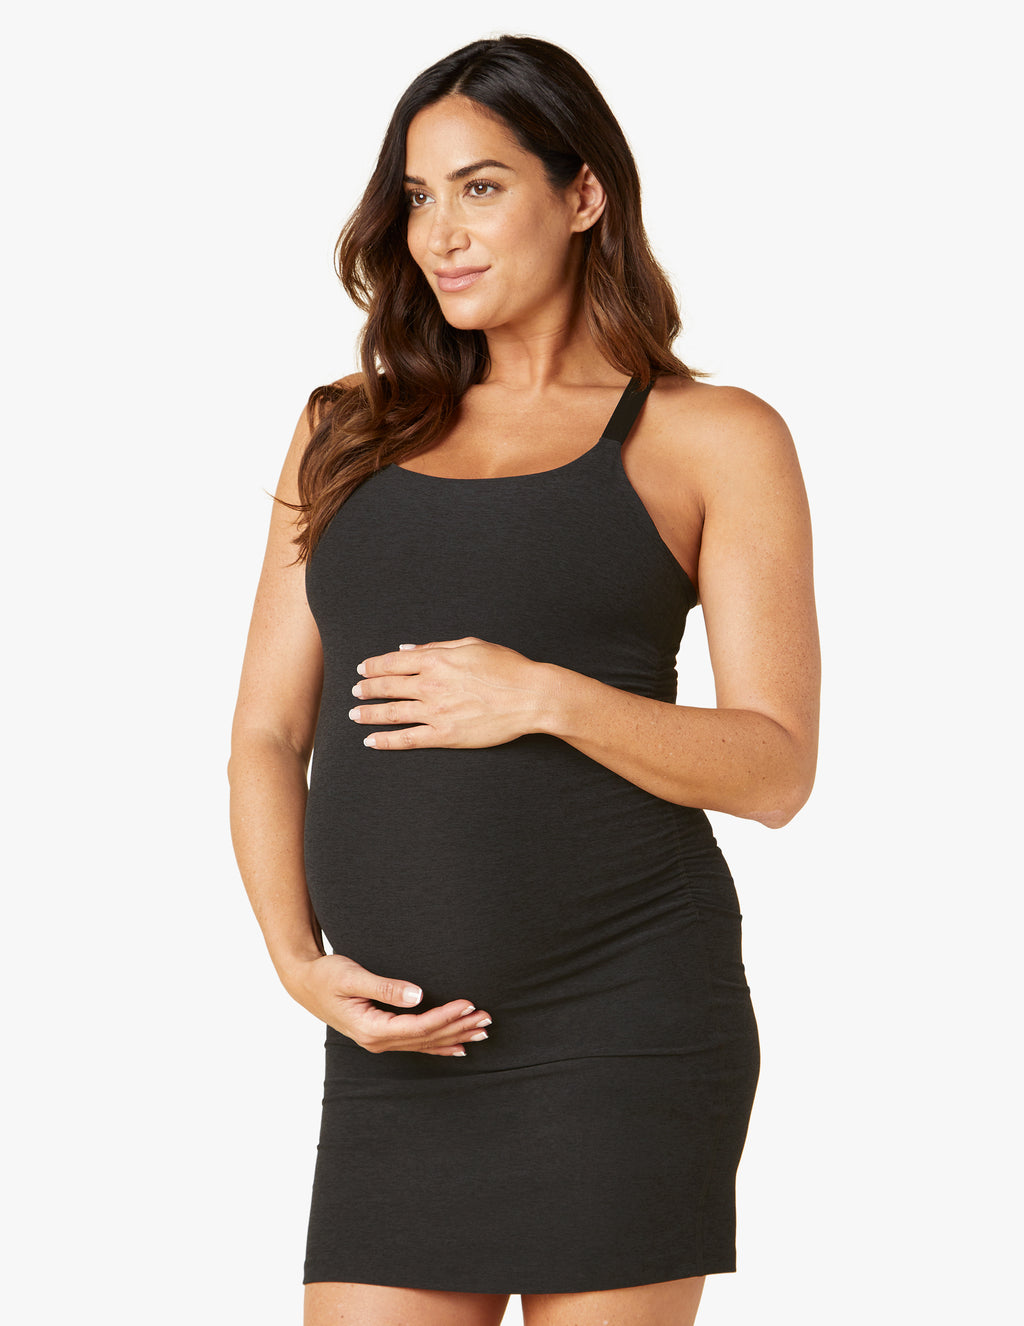 Spacedye Maternity Move It Dress Featured Image